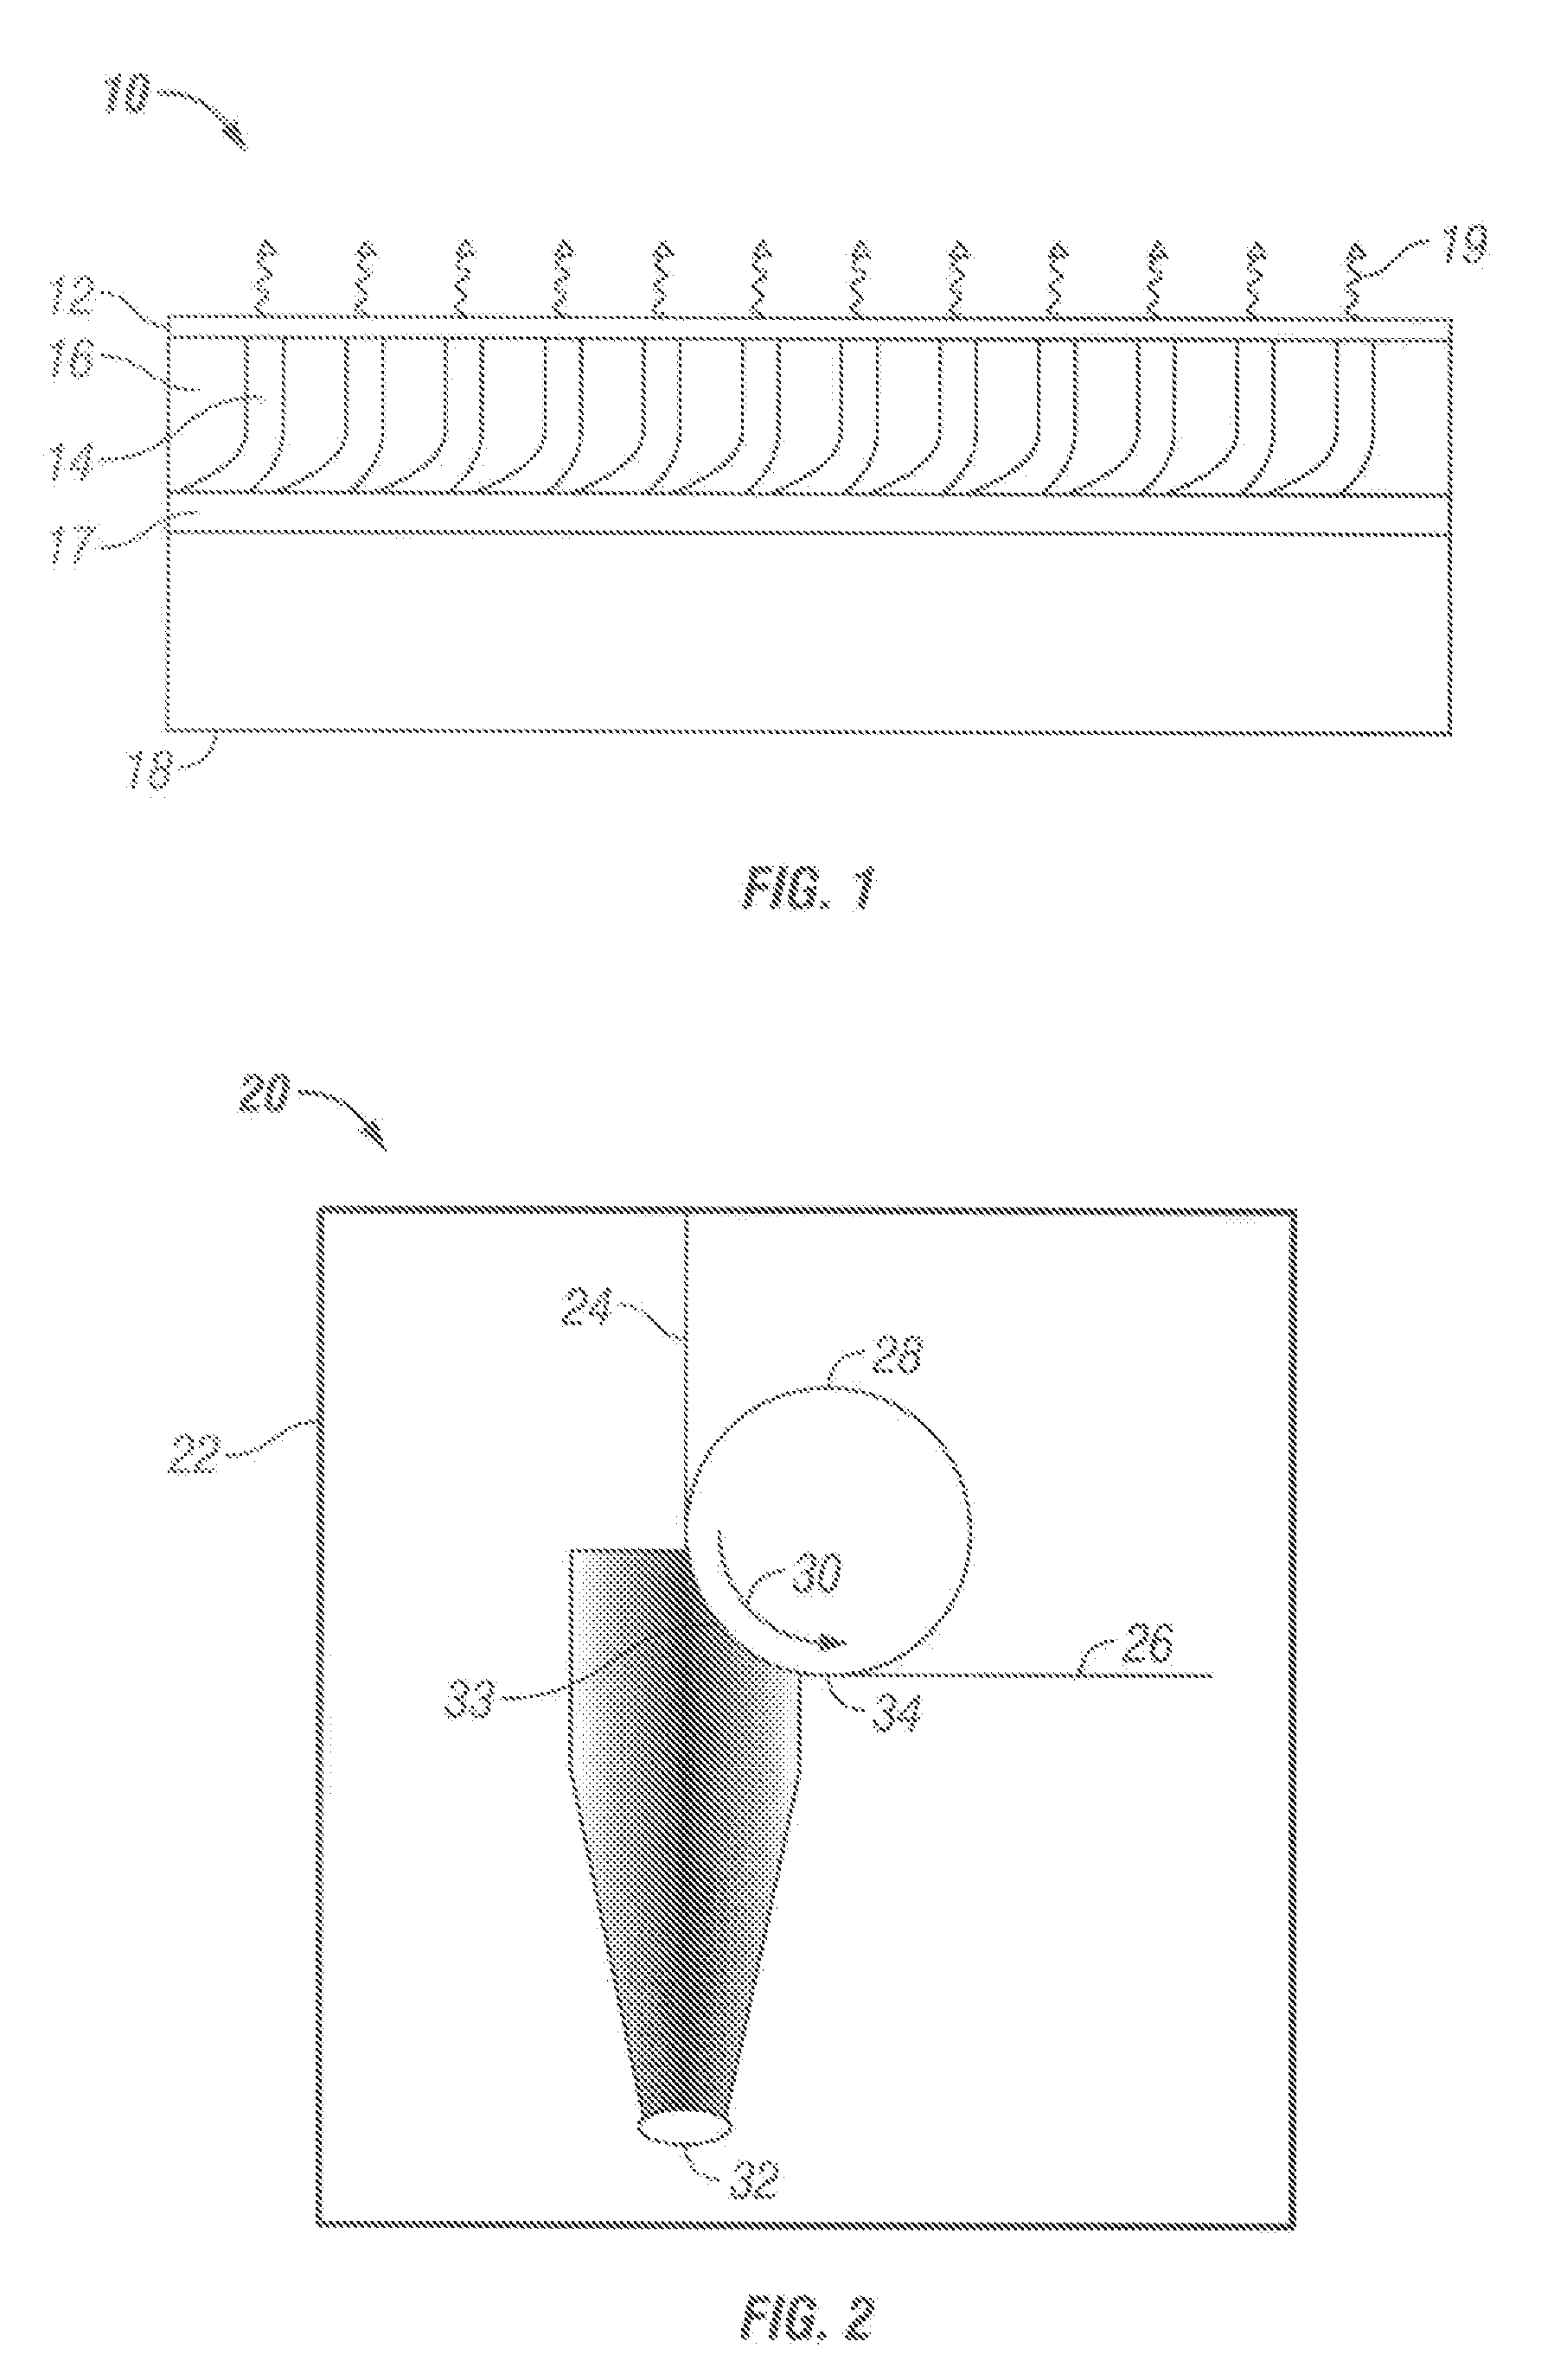 Chemically and physically tailored structured thin film assemblies for corrosion prevention or promotion